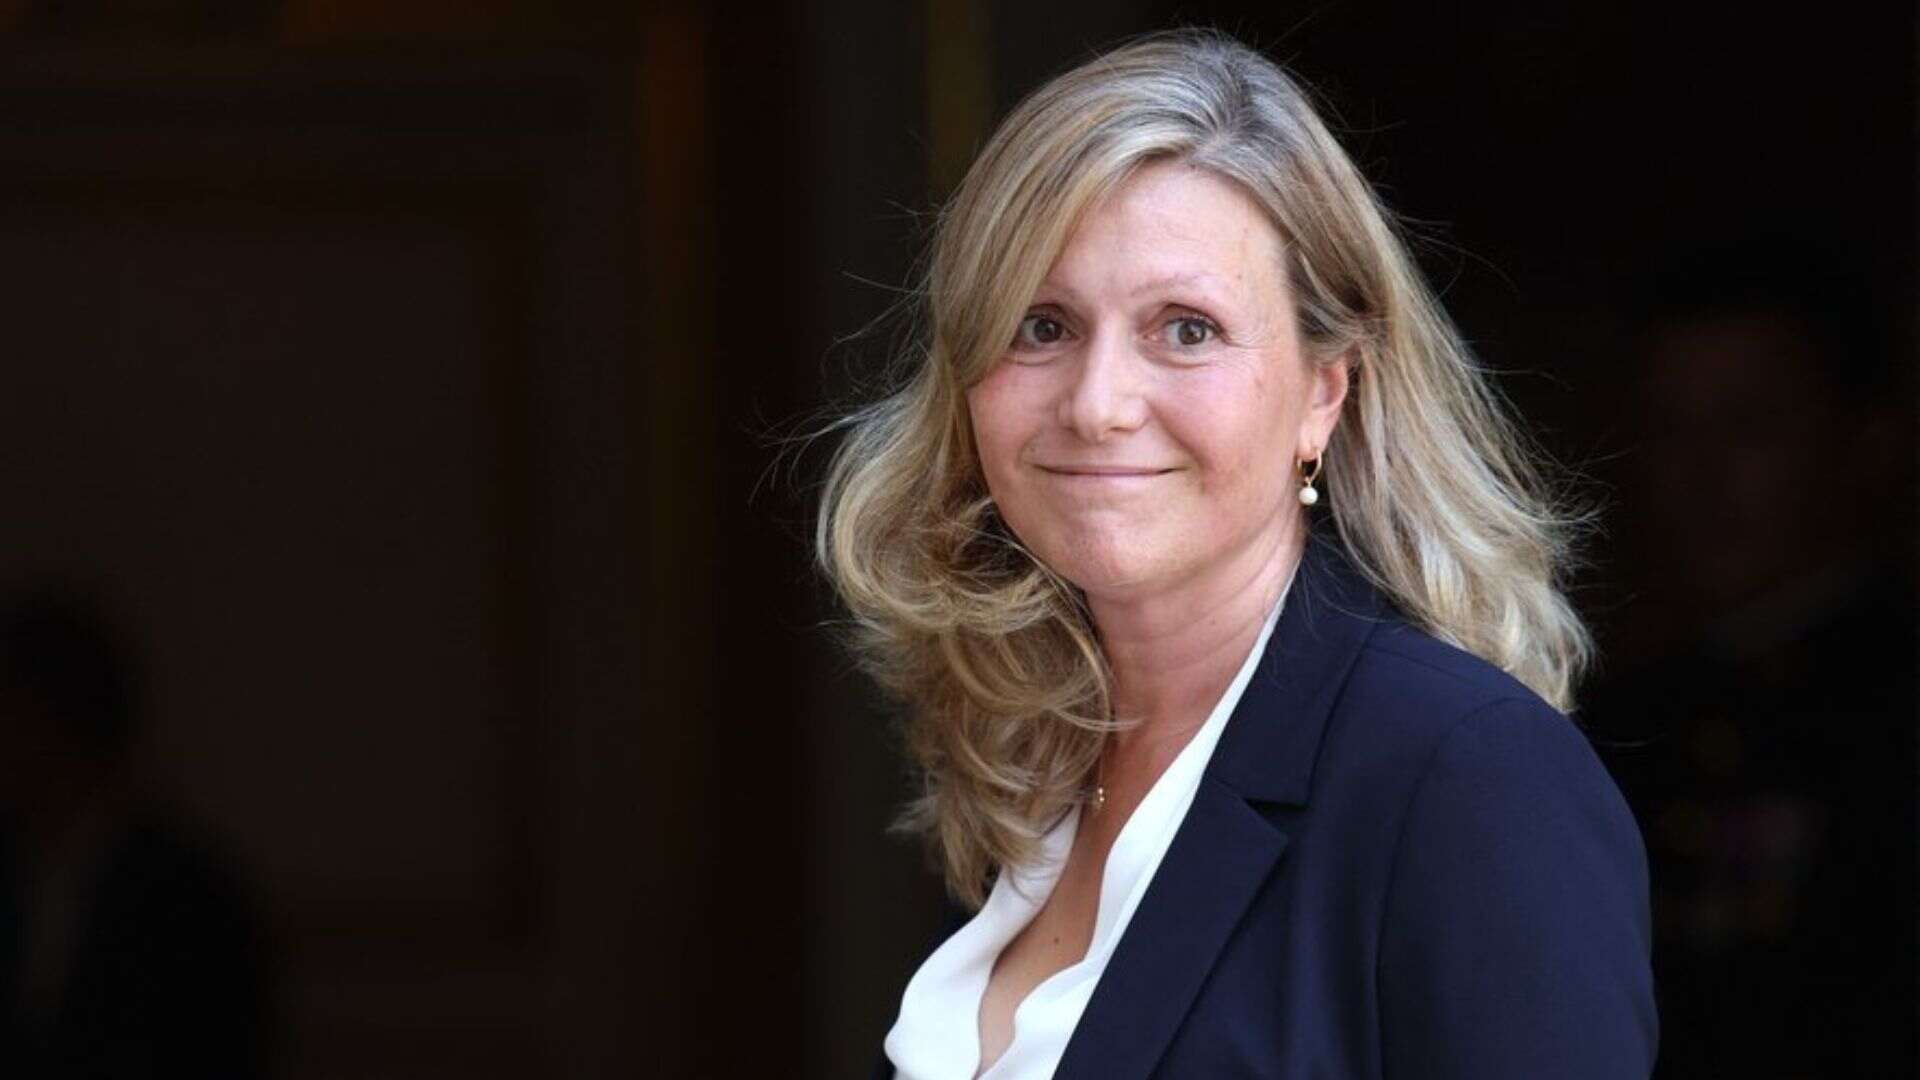 Yaël Braun-Pivet Reappointed As French National Assembly President